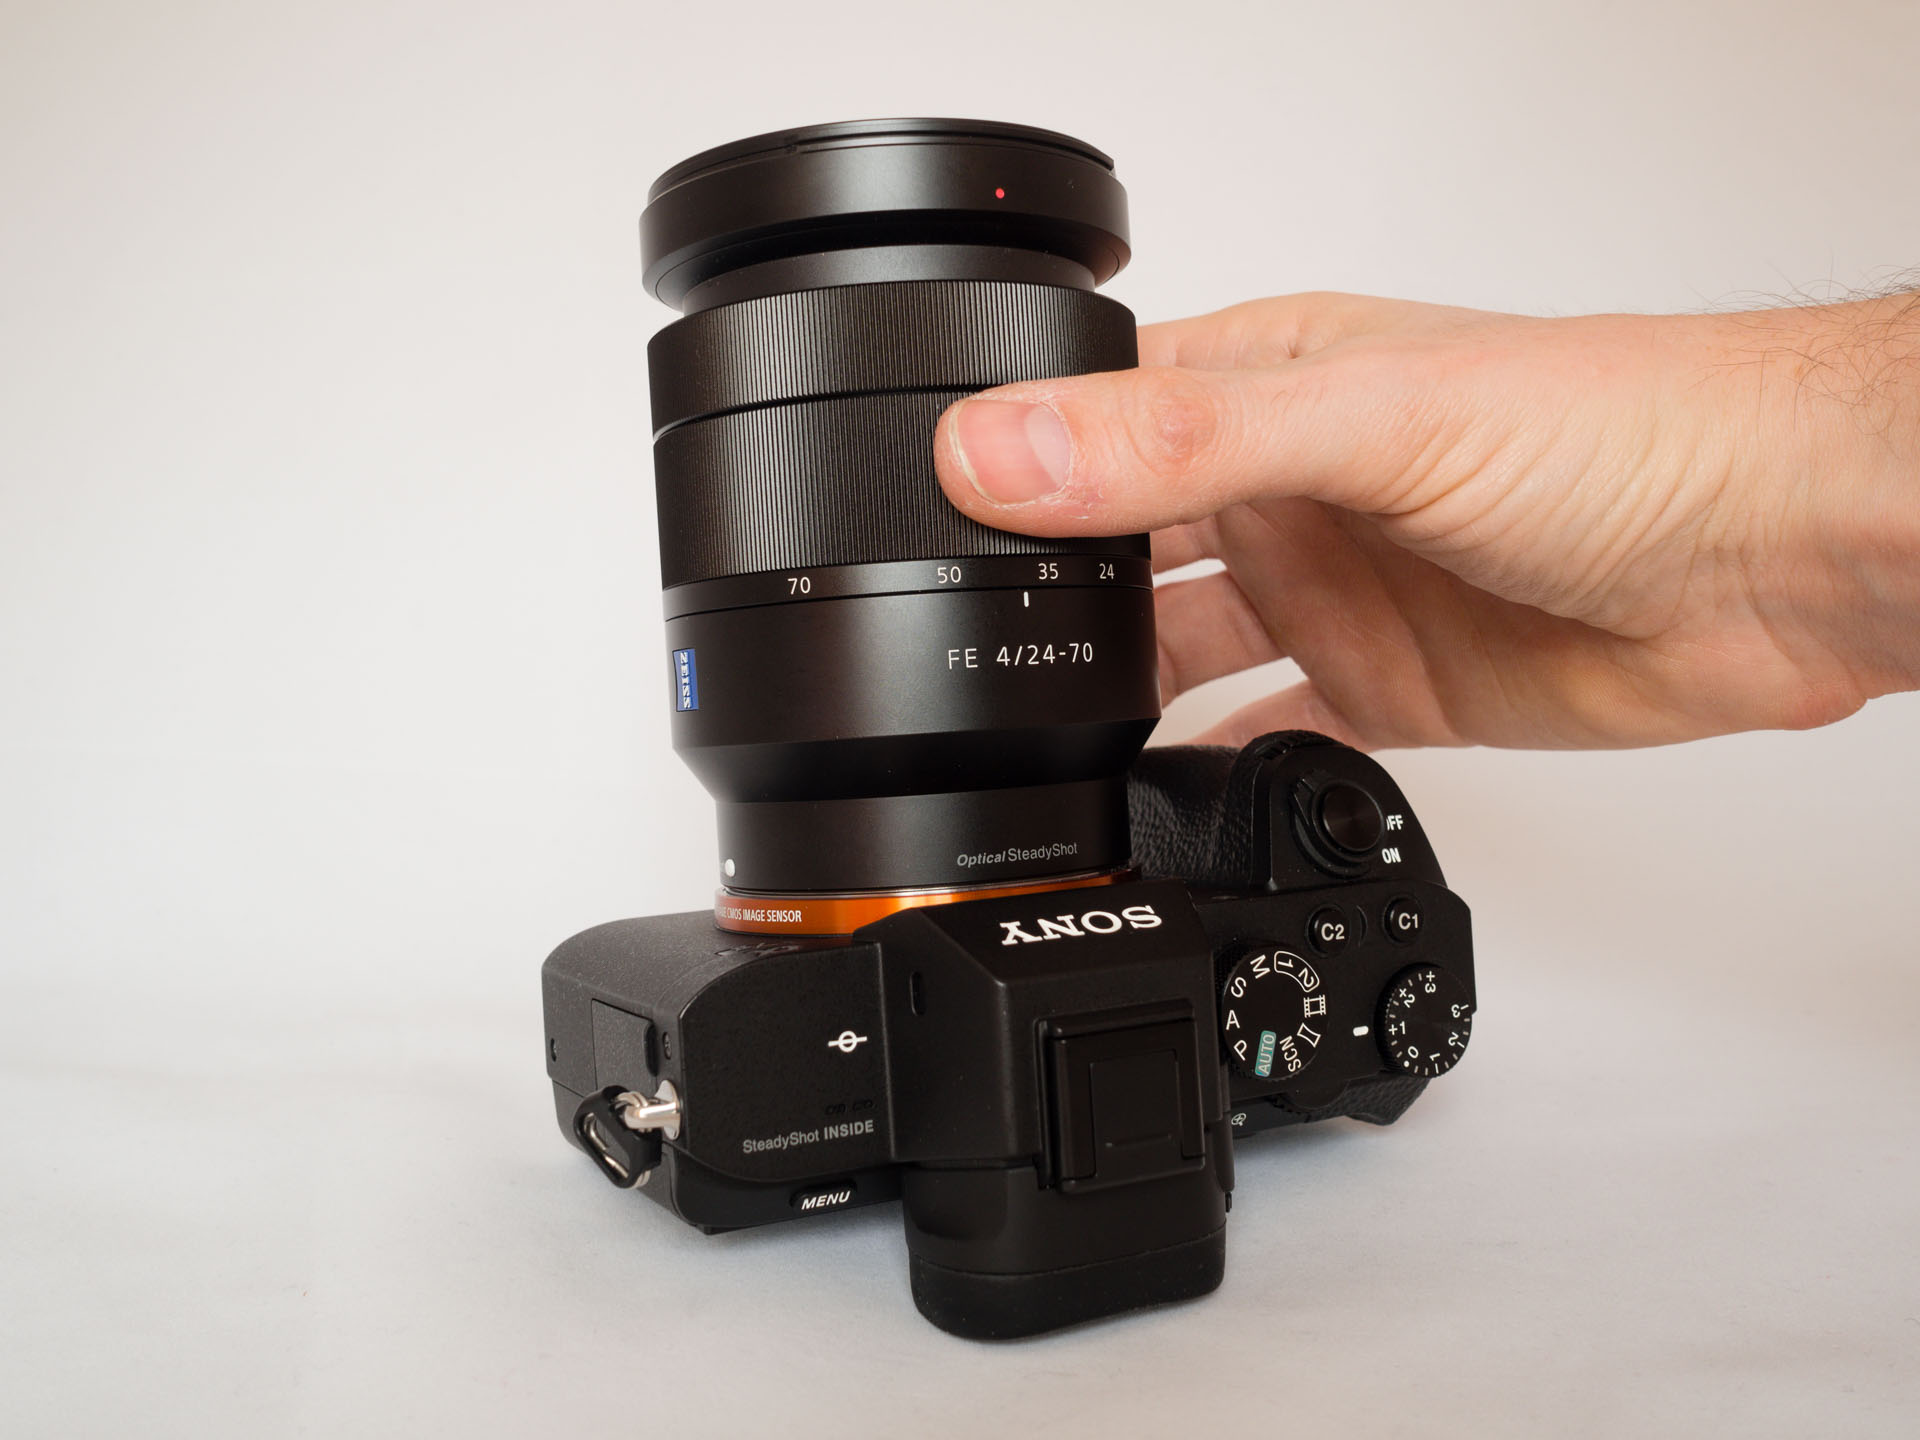 The Sony Zeiss FE 24-70mm f/4 Lens Review — Tools and Toys